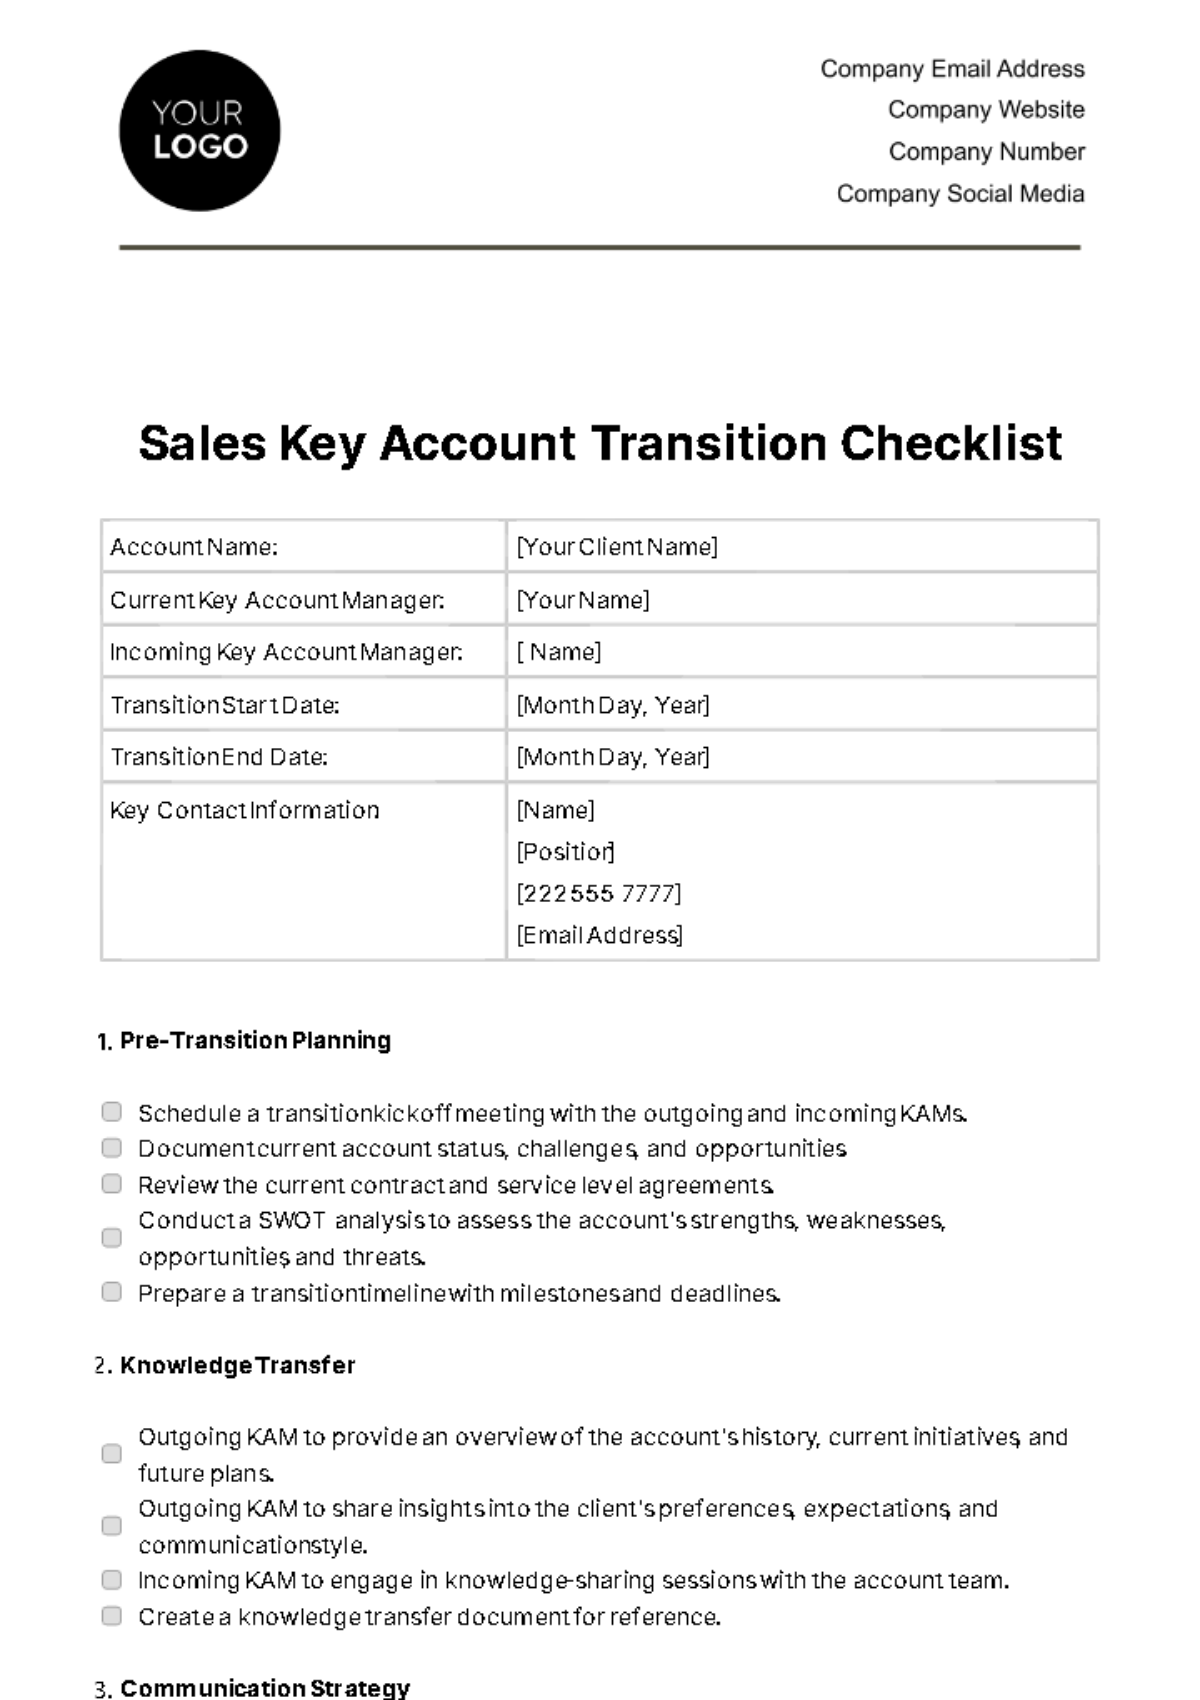 Free Sales Key Account Transition Checklist Template